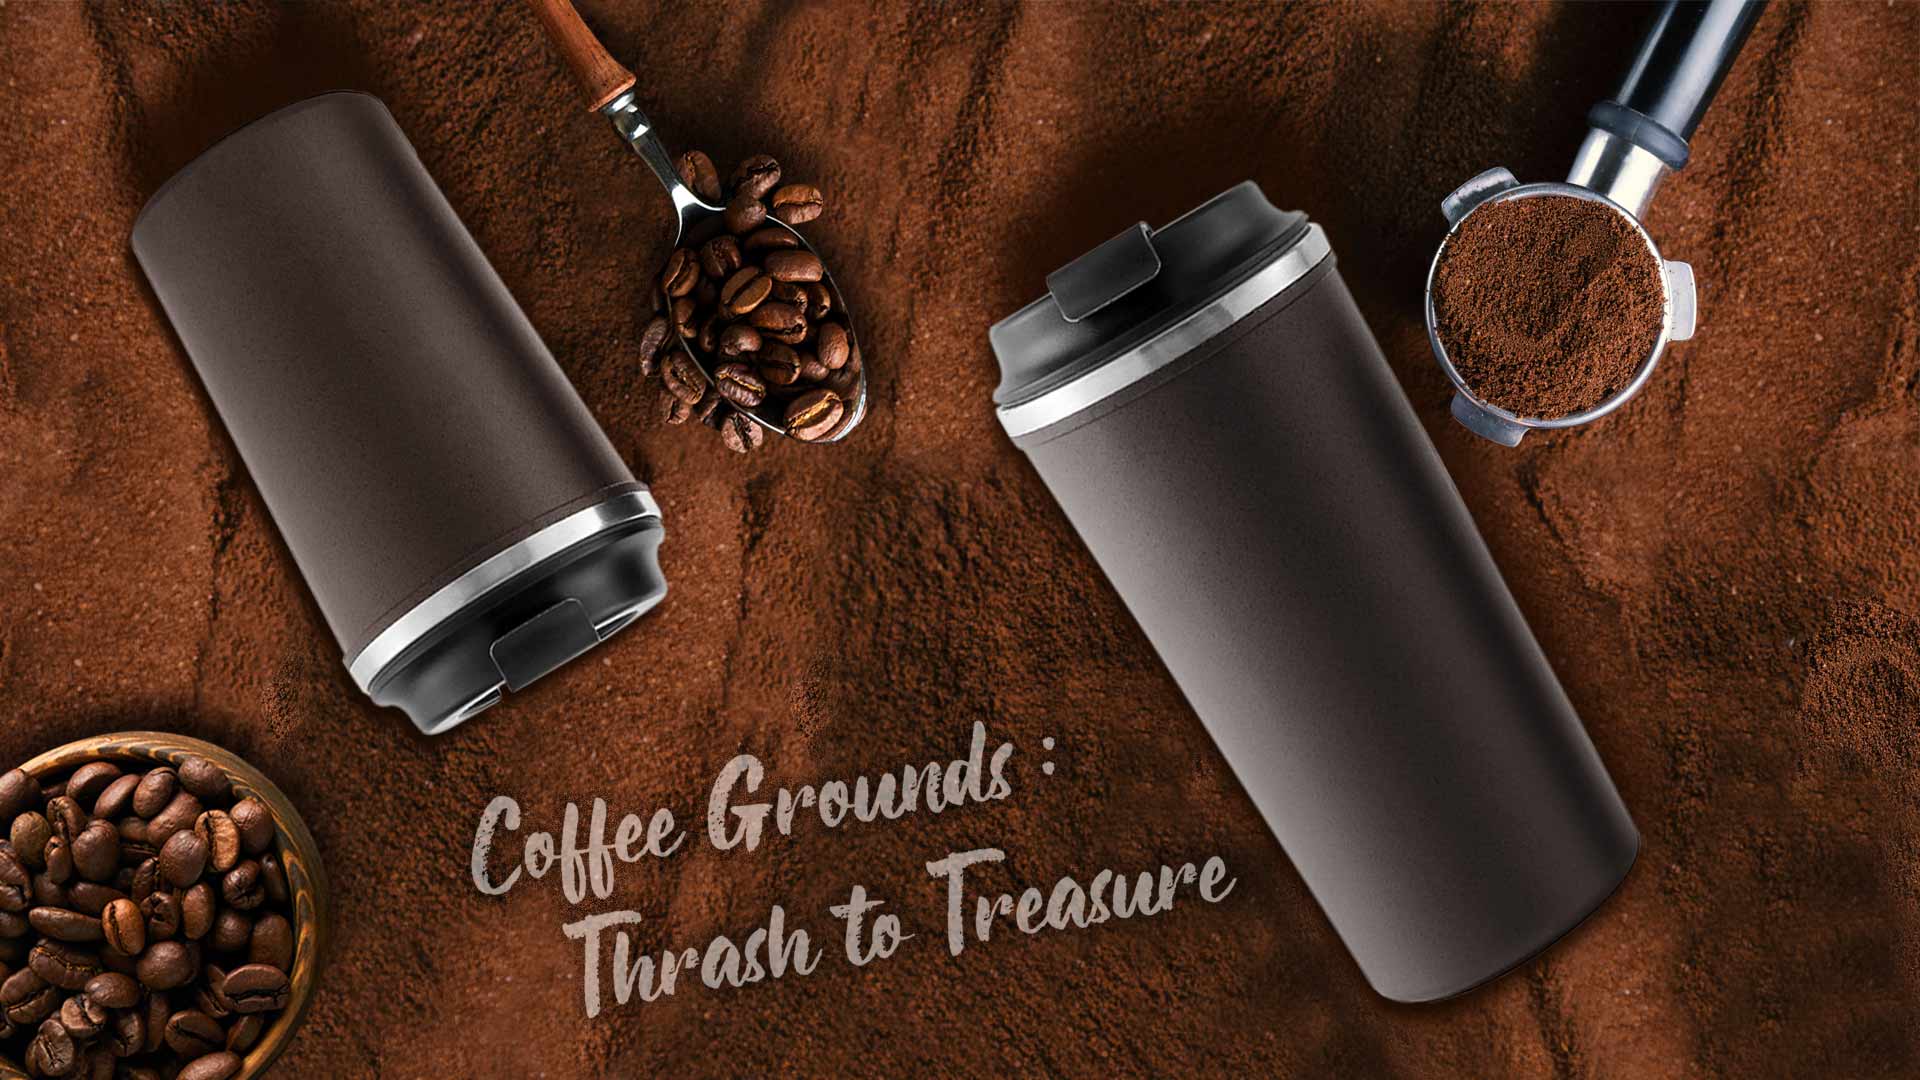 coffee grounds-inspired gift ideas